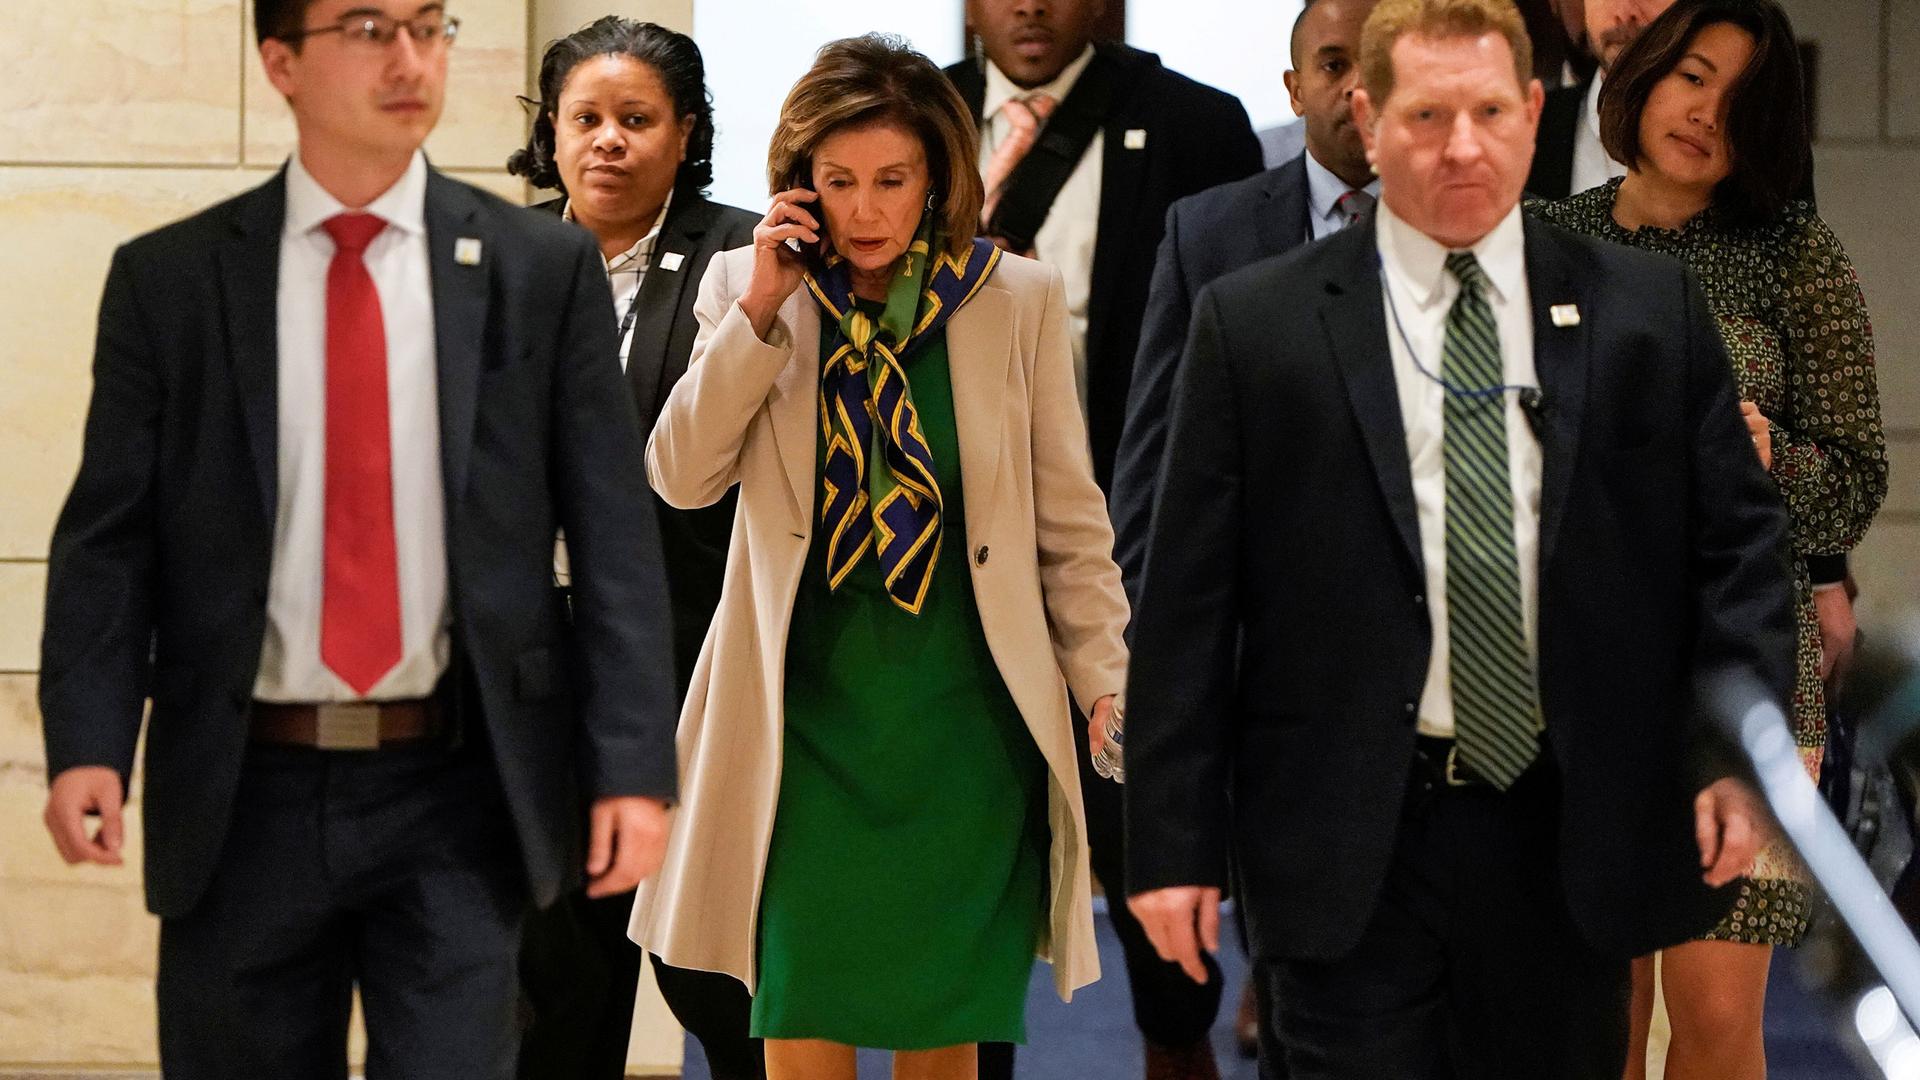 Speaker of the House Nancy Pelosi is shown walking amongst a group of people and wearing a green dress and khaki jacket while speaking on the phone.